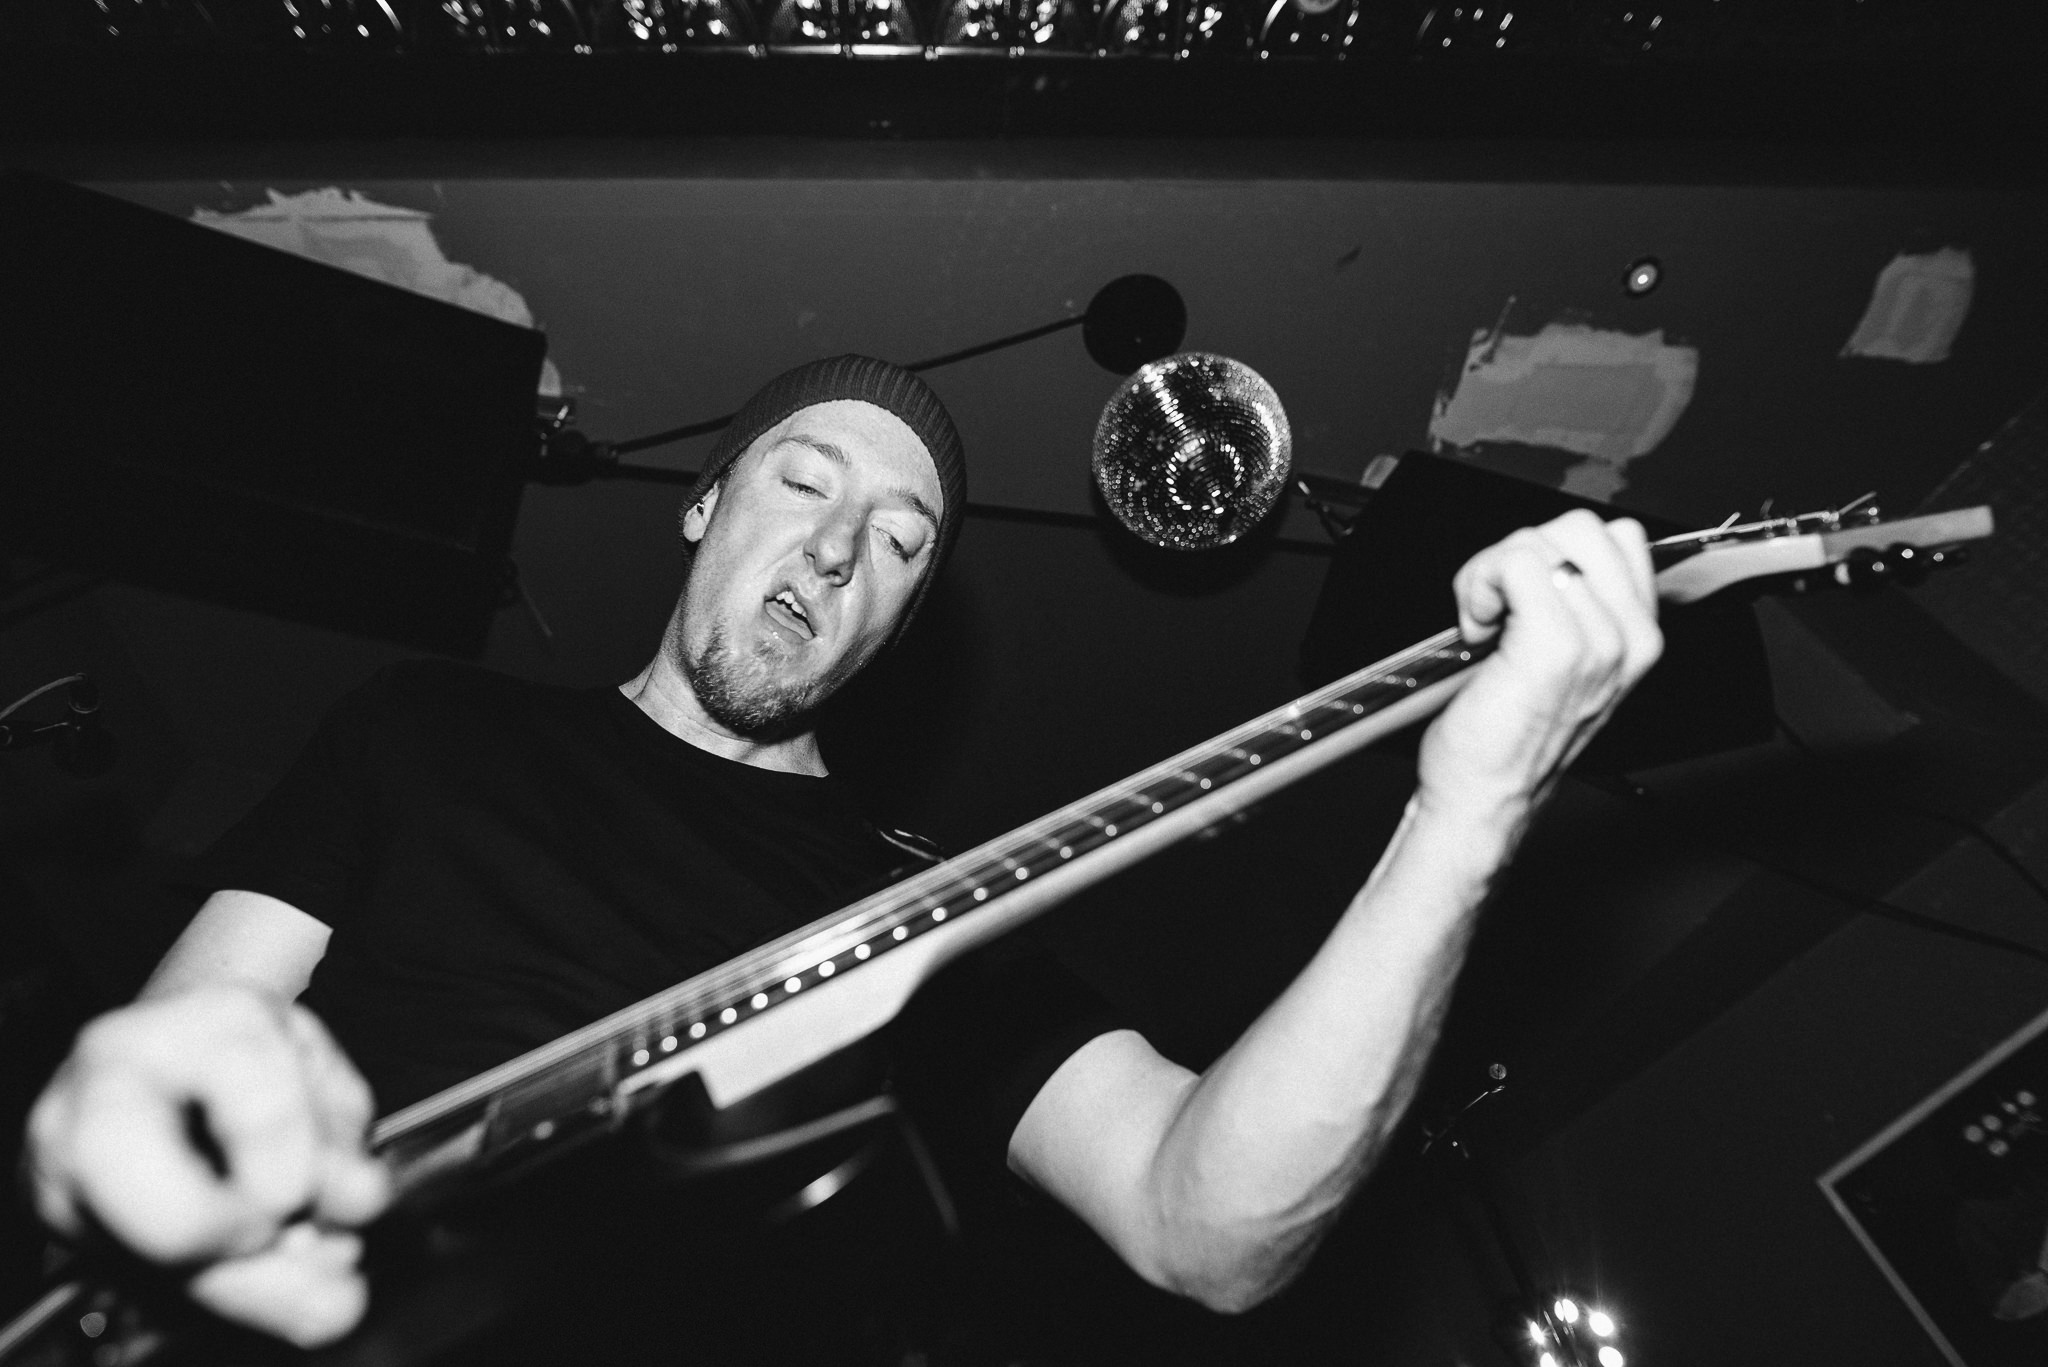 A closeup, black and white shot of Moe playing intensely